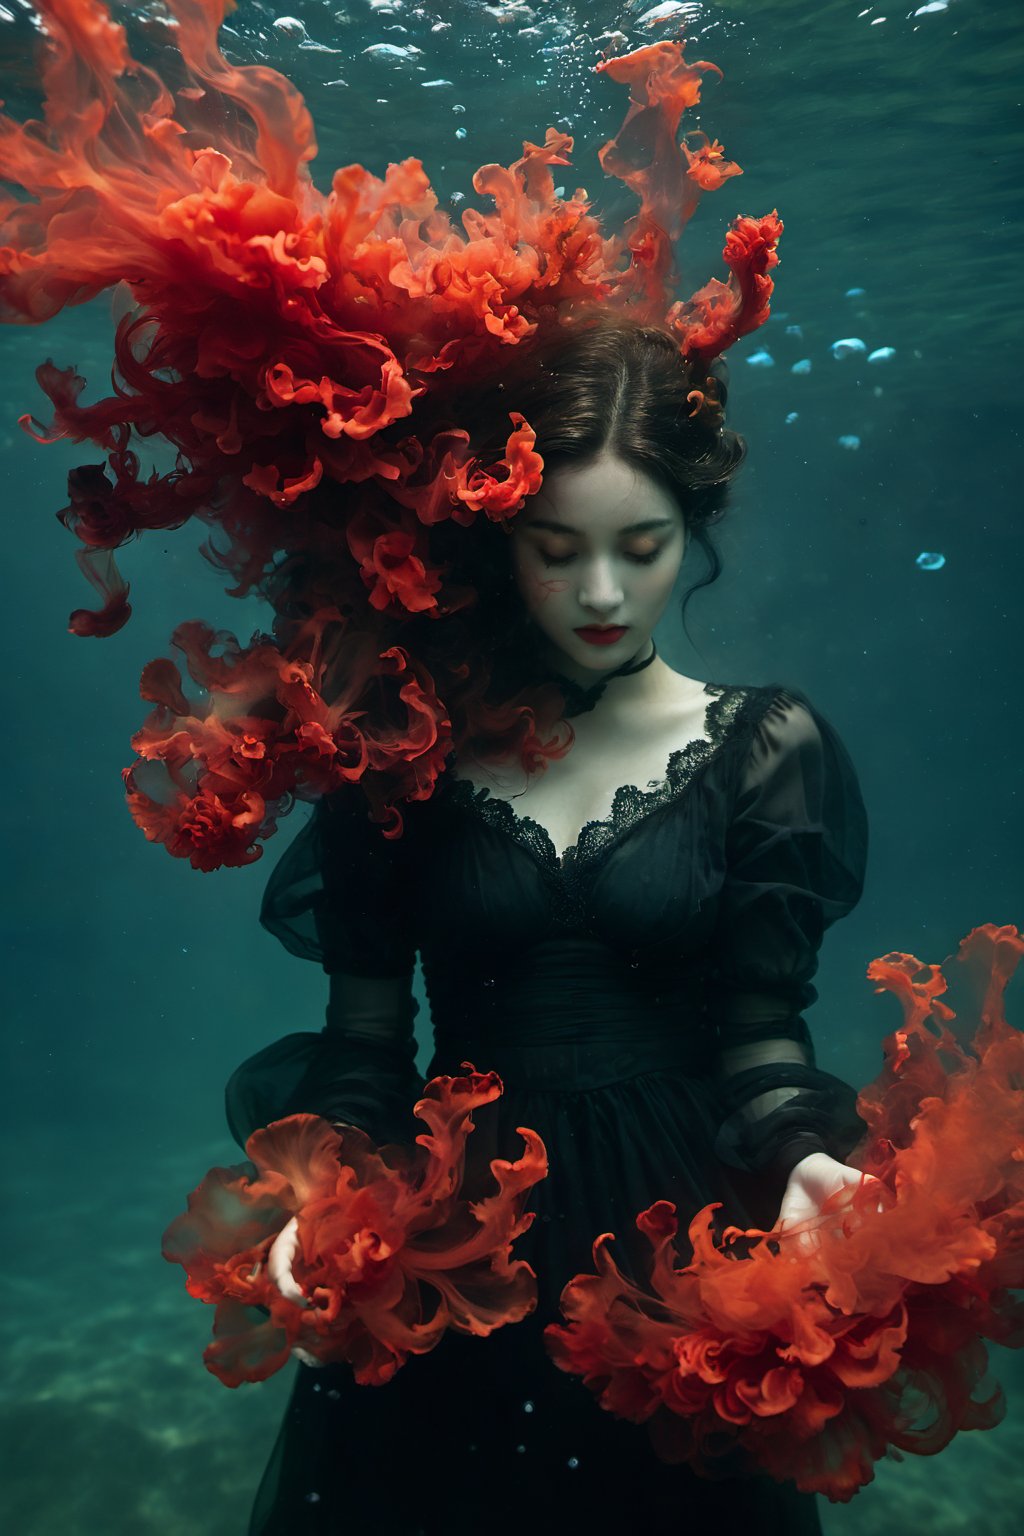 A woman submerged in water, her dark attire contrasting with the intense red ink blooming around her. Above, light pierces through the water, illuminating the scene and highlighting the swirling ink clouds that envelope her. The red ink catches the light, creating a radiant glow that gives the appearance of an underwater dance of light and color, where the ink almost resembles a fiery smoke in the aquatic environment, Precipitate girl, sexy pose